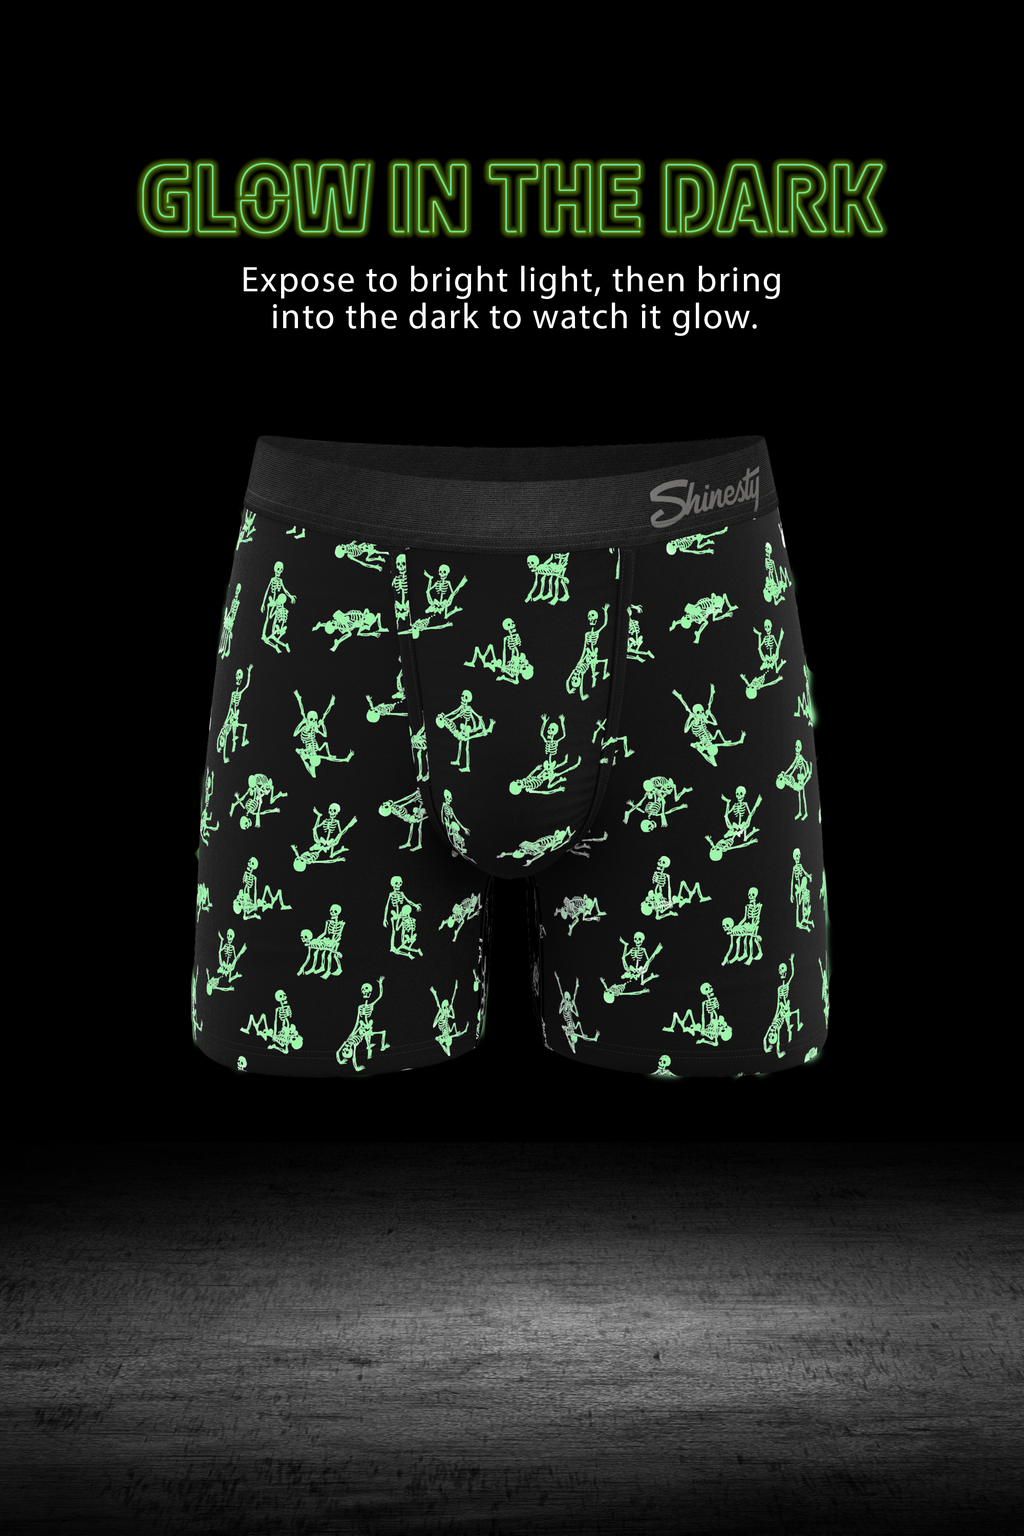 Skeleton-themed Ball Hammock® Pouch Underwear with glow-in-the-dark accents.